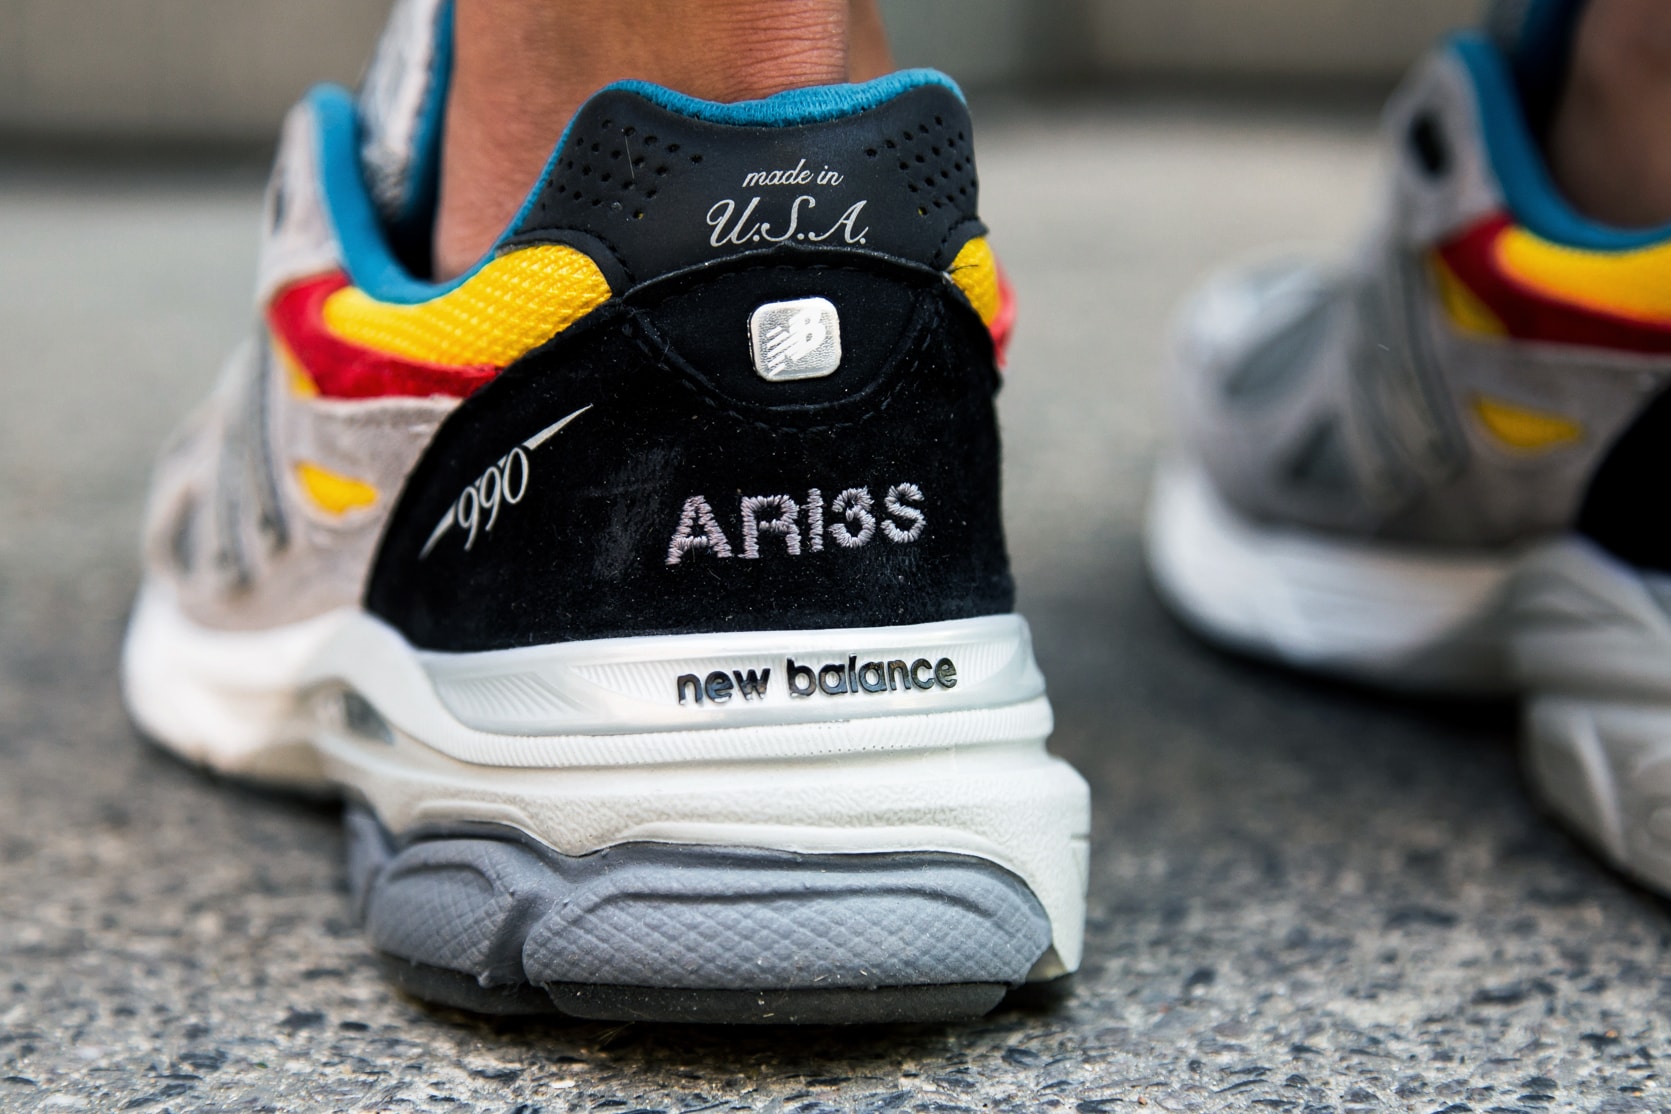 Aries x New Balance 990v3 Trainers On-Foot Closer Look Collab Collaboration Releasing Thursday May 17 2018